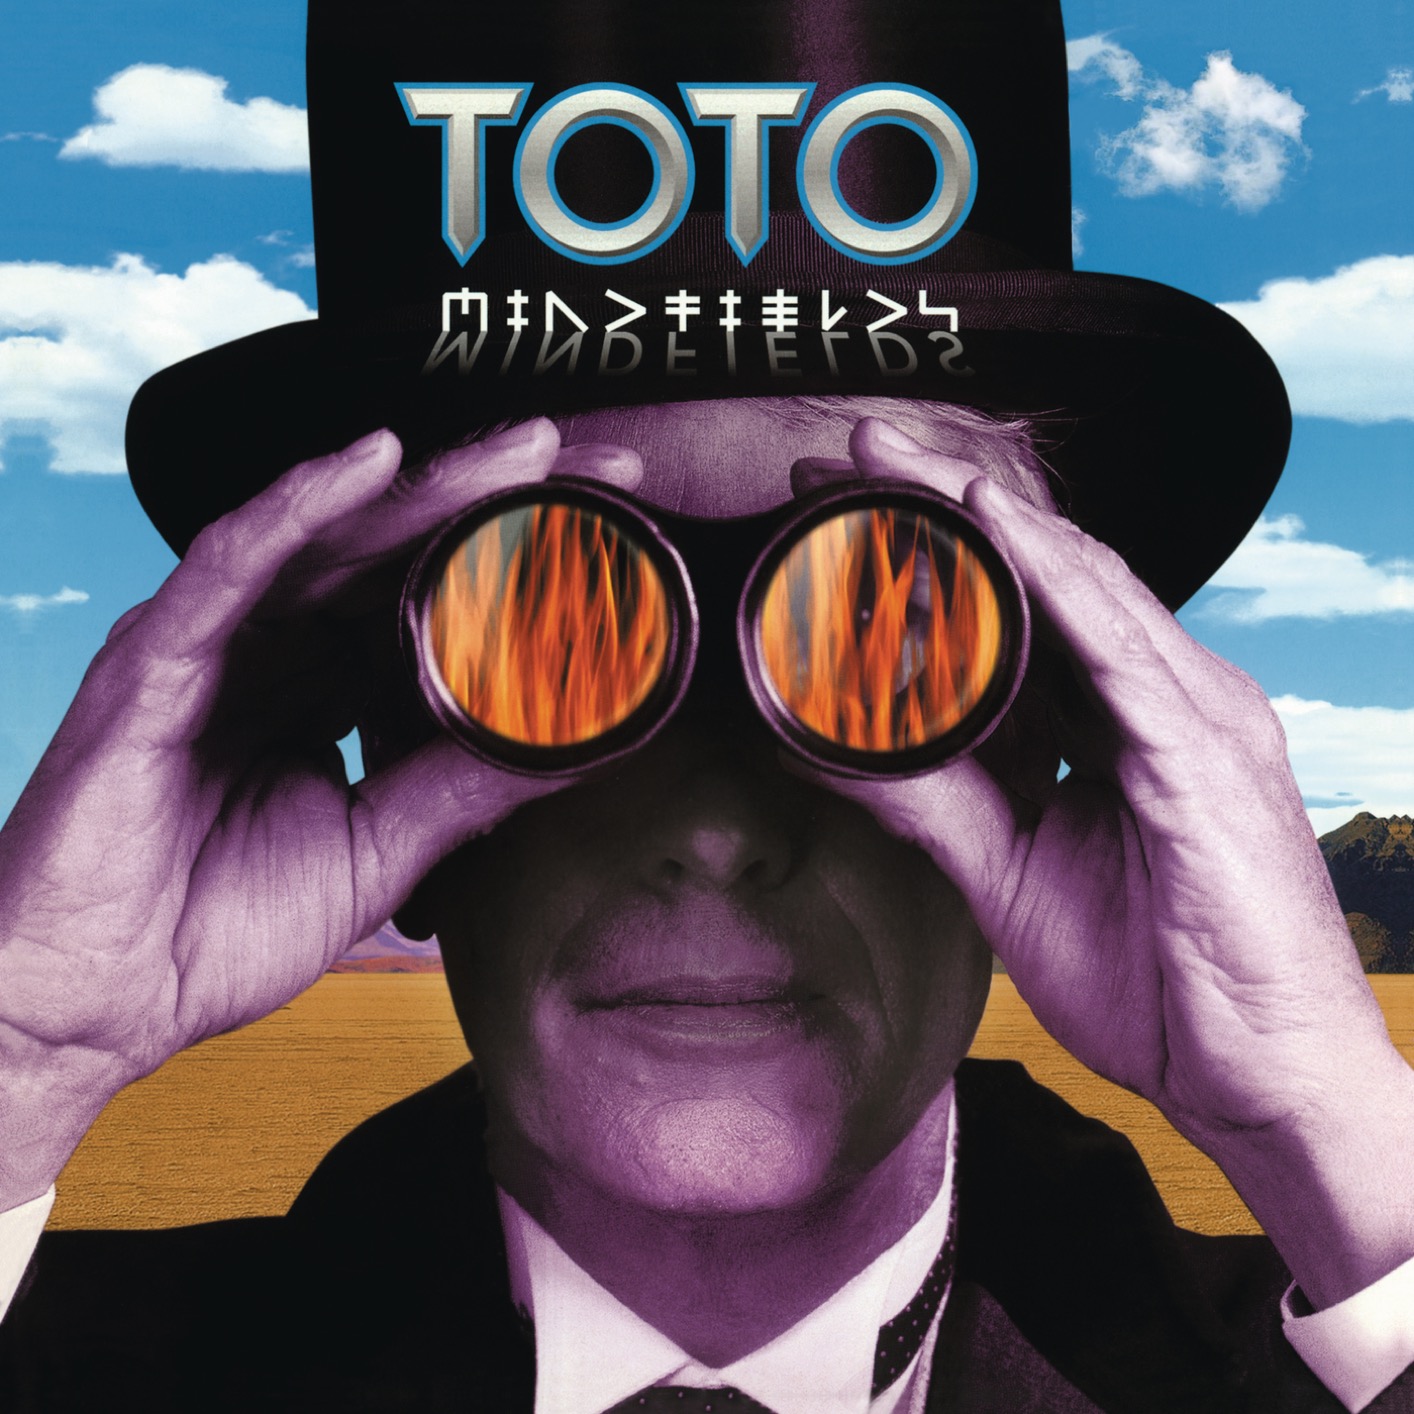 Toto - Mindfields (Remastered) (1999/2020) [FLAC 24bit/192kHz]